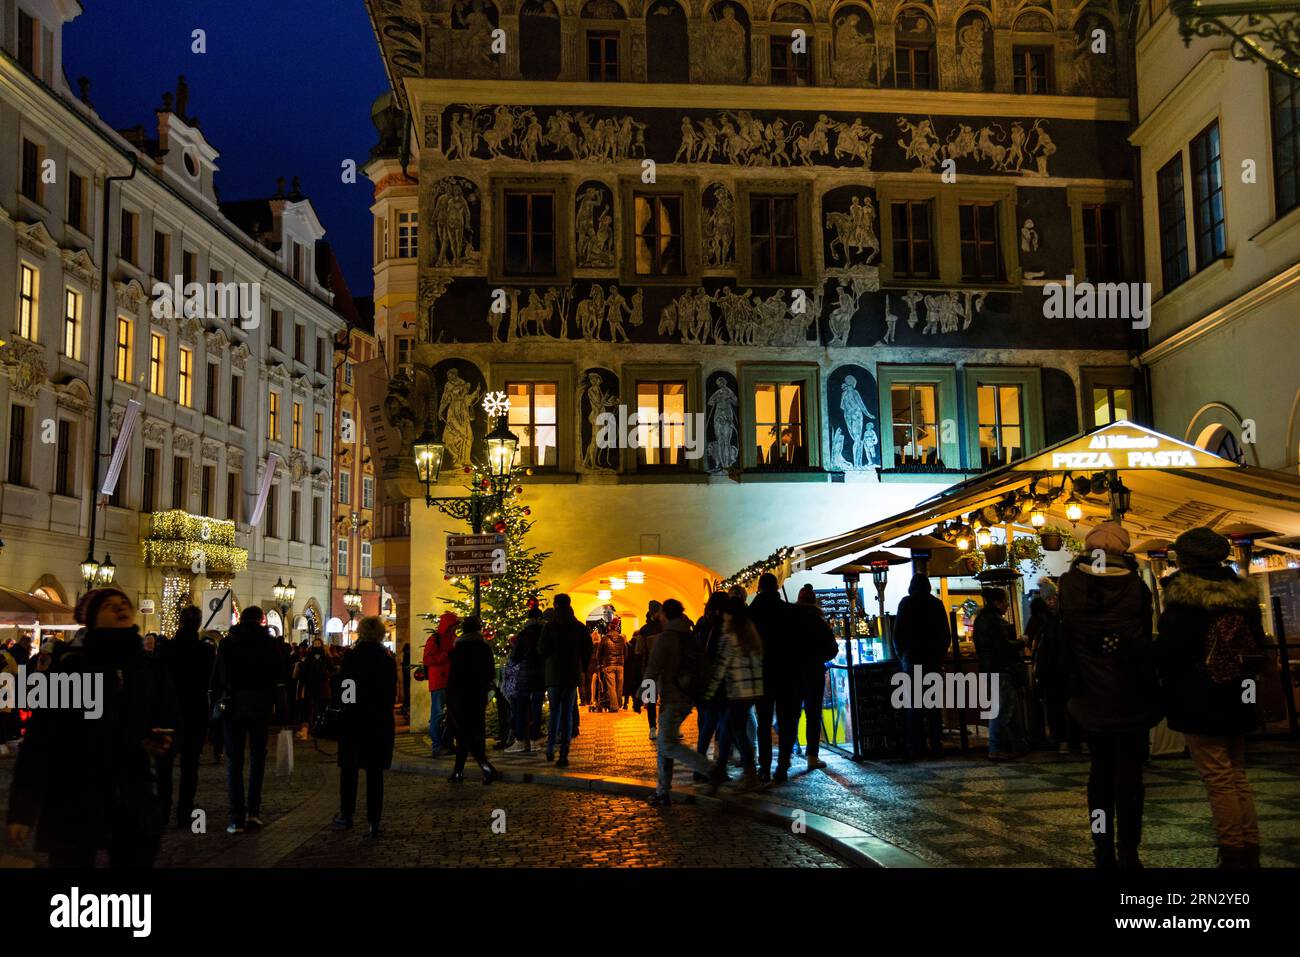 The House at the Minute in Old Town Square in Prague, Czech Republic. Stock Photo